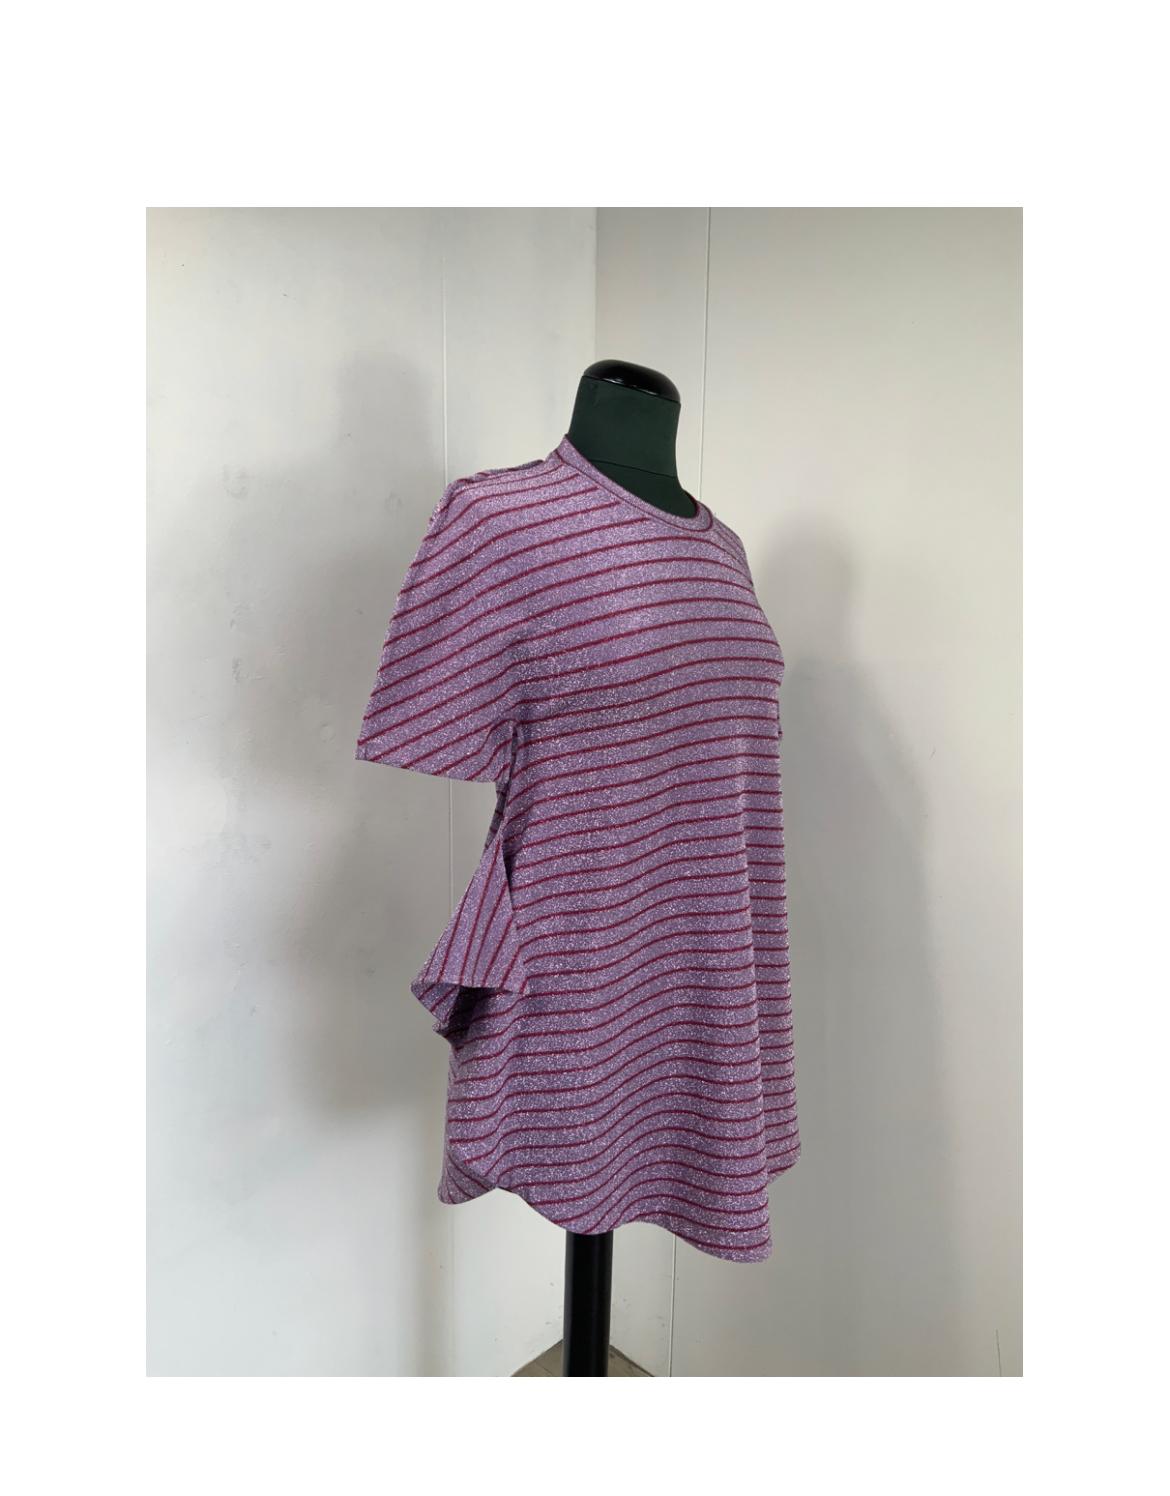 Margiela T-shirtIt lacks label composition but we think it is cotton covered with lurex threads.
Size S.
Shoulders 42 cm
Bust 44 cm
Length 80 cm
As new, excellent general condition has some pulled wires.